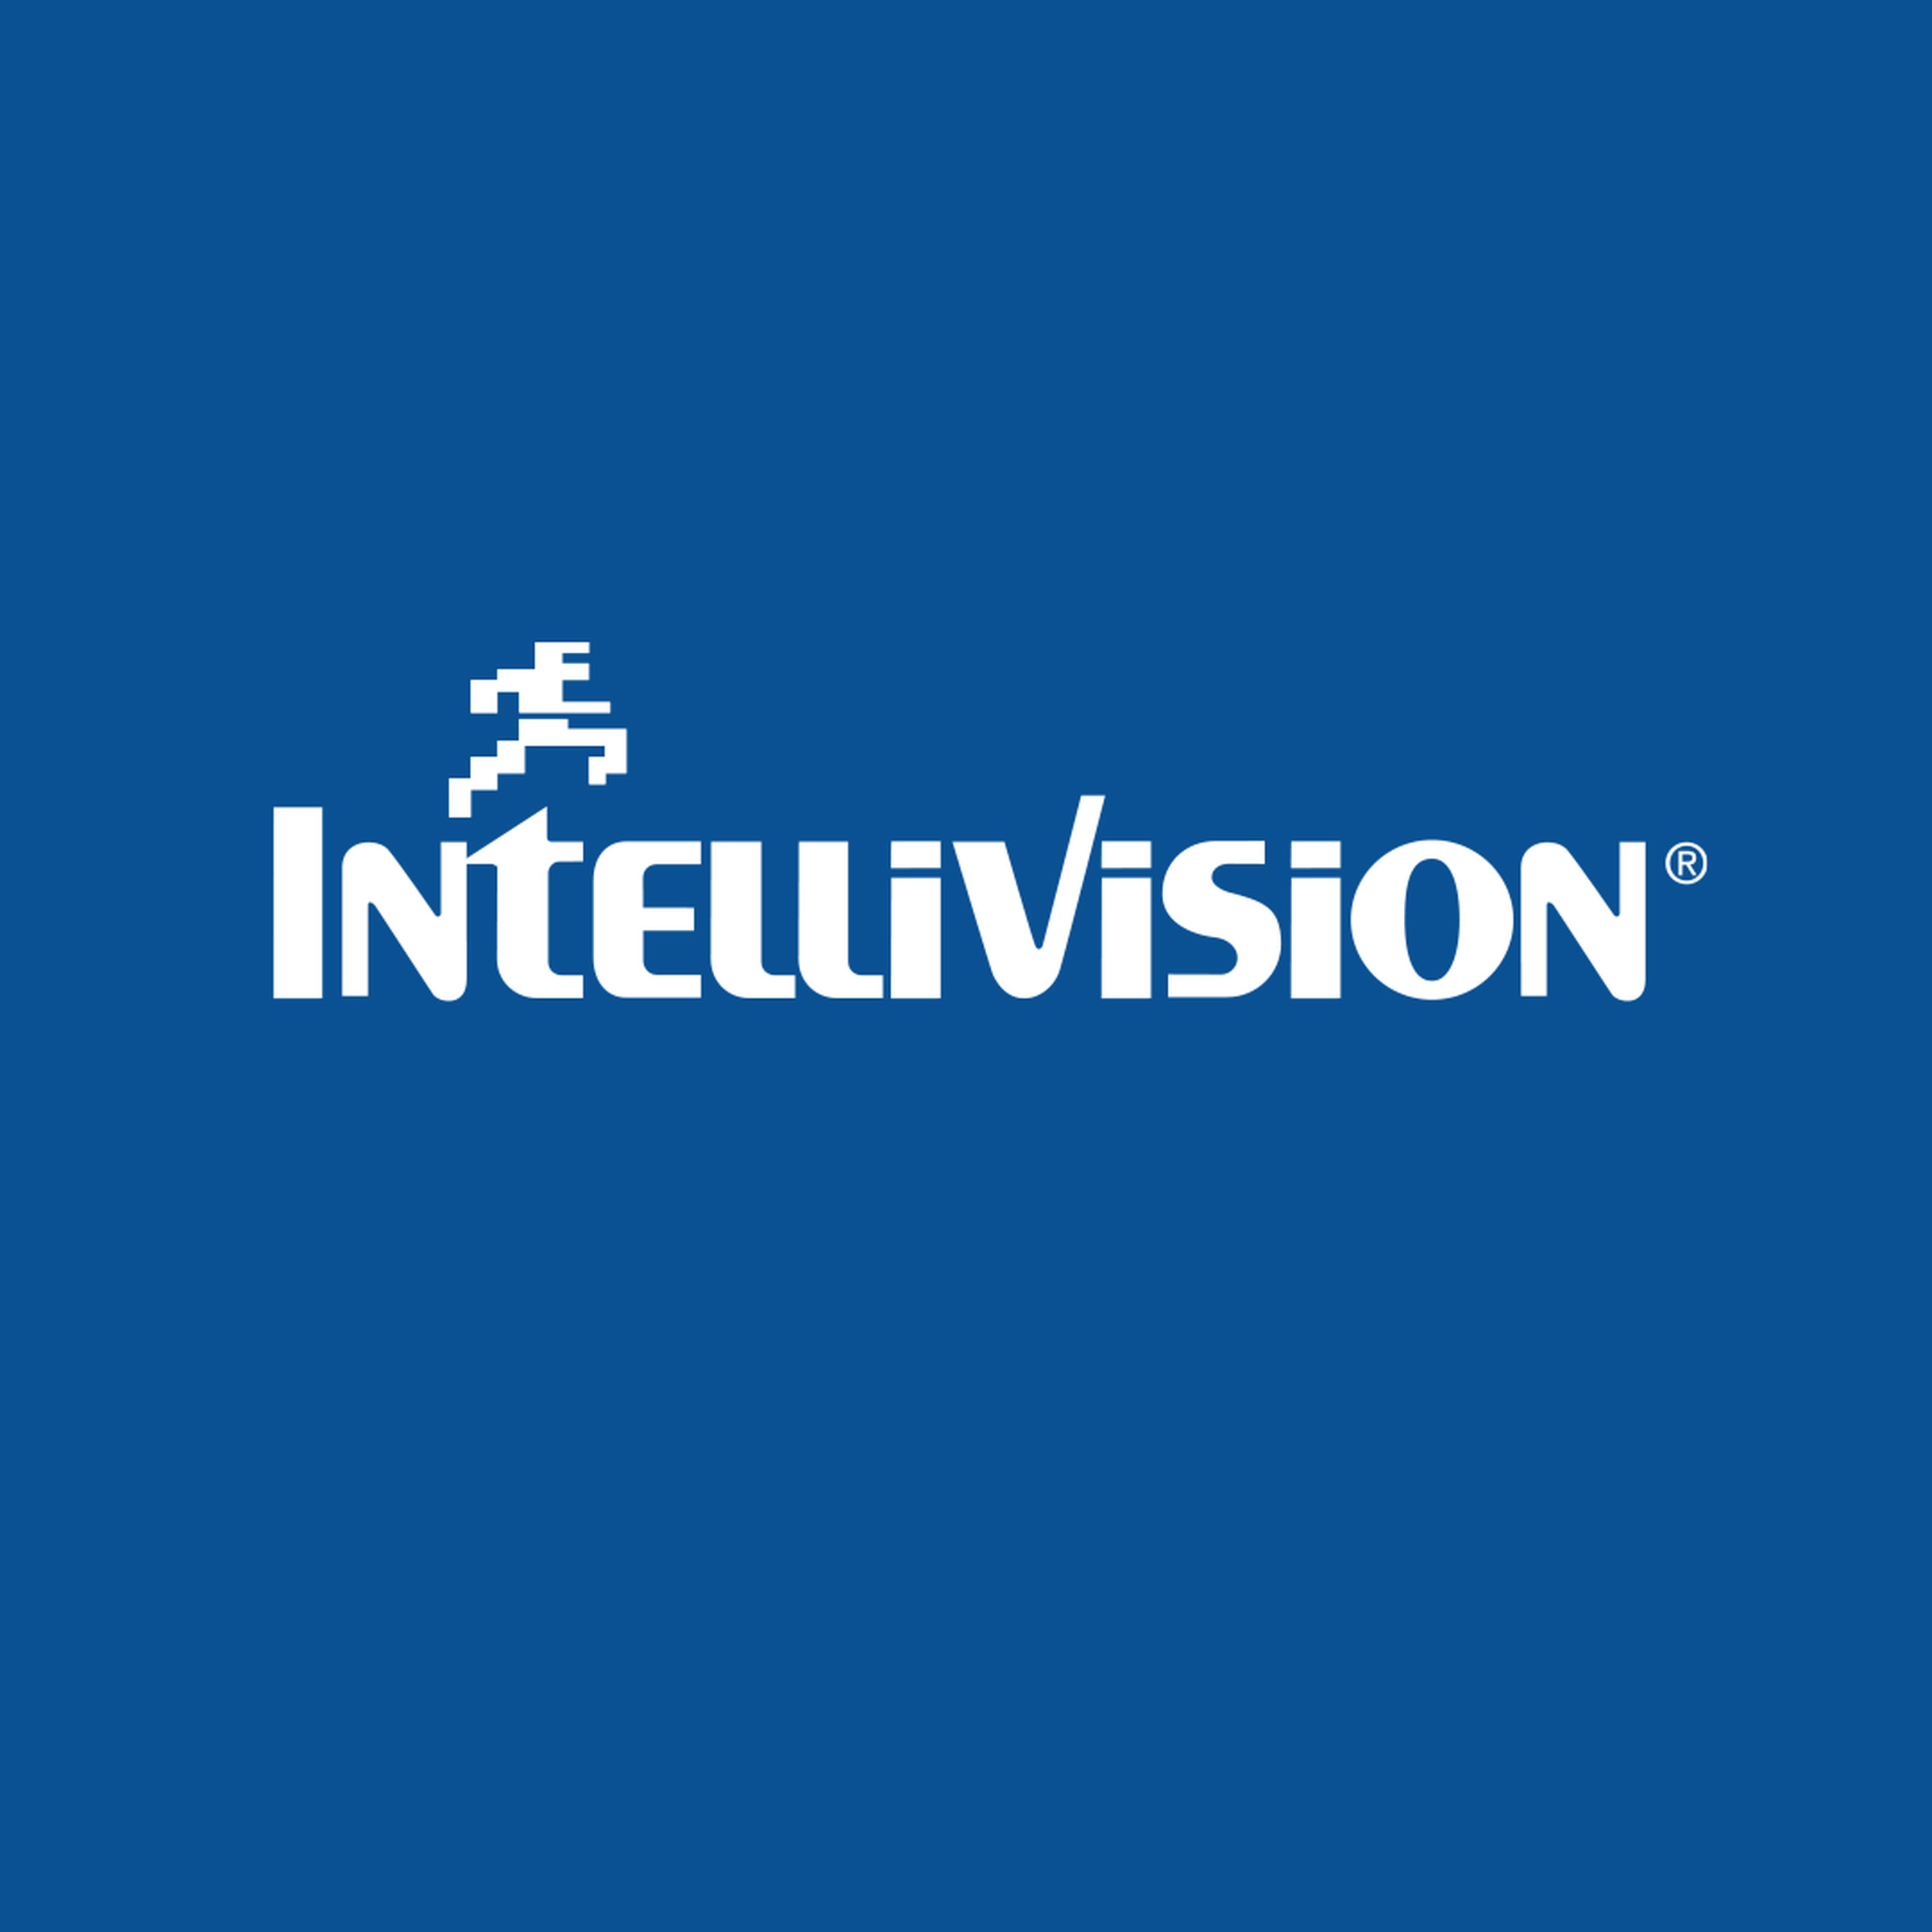 Logo for the Intellivision video game company.